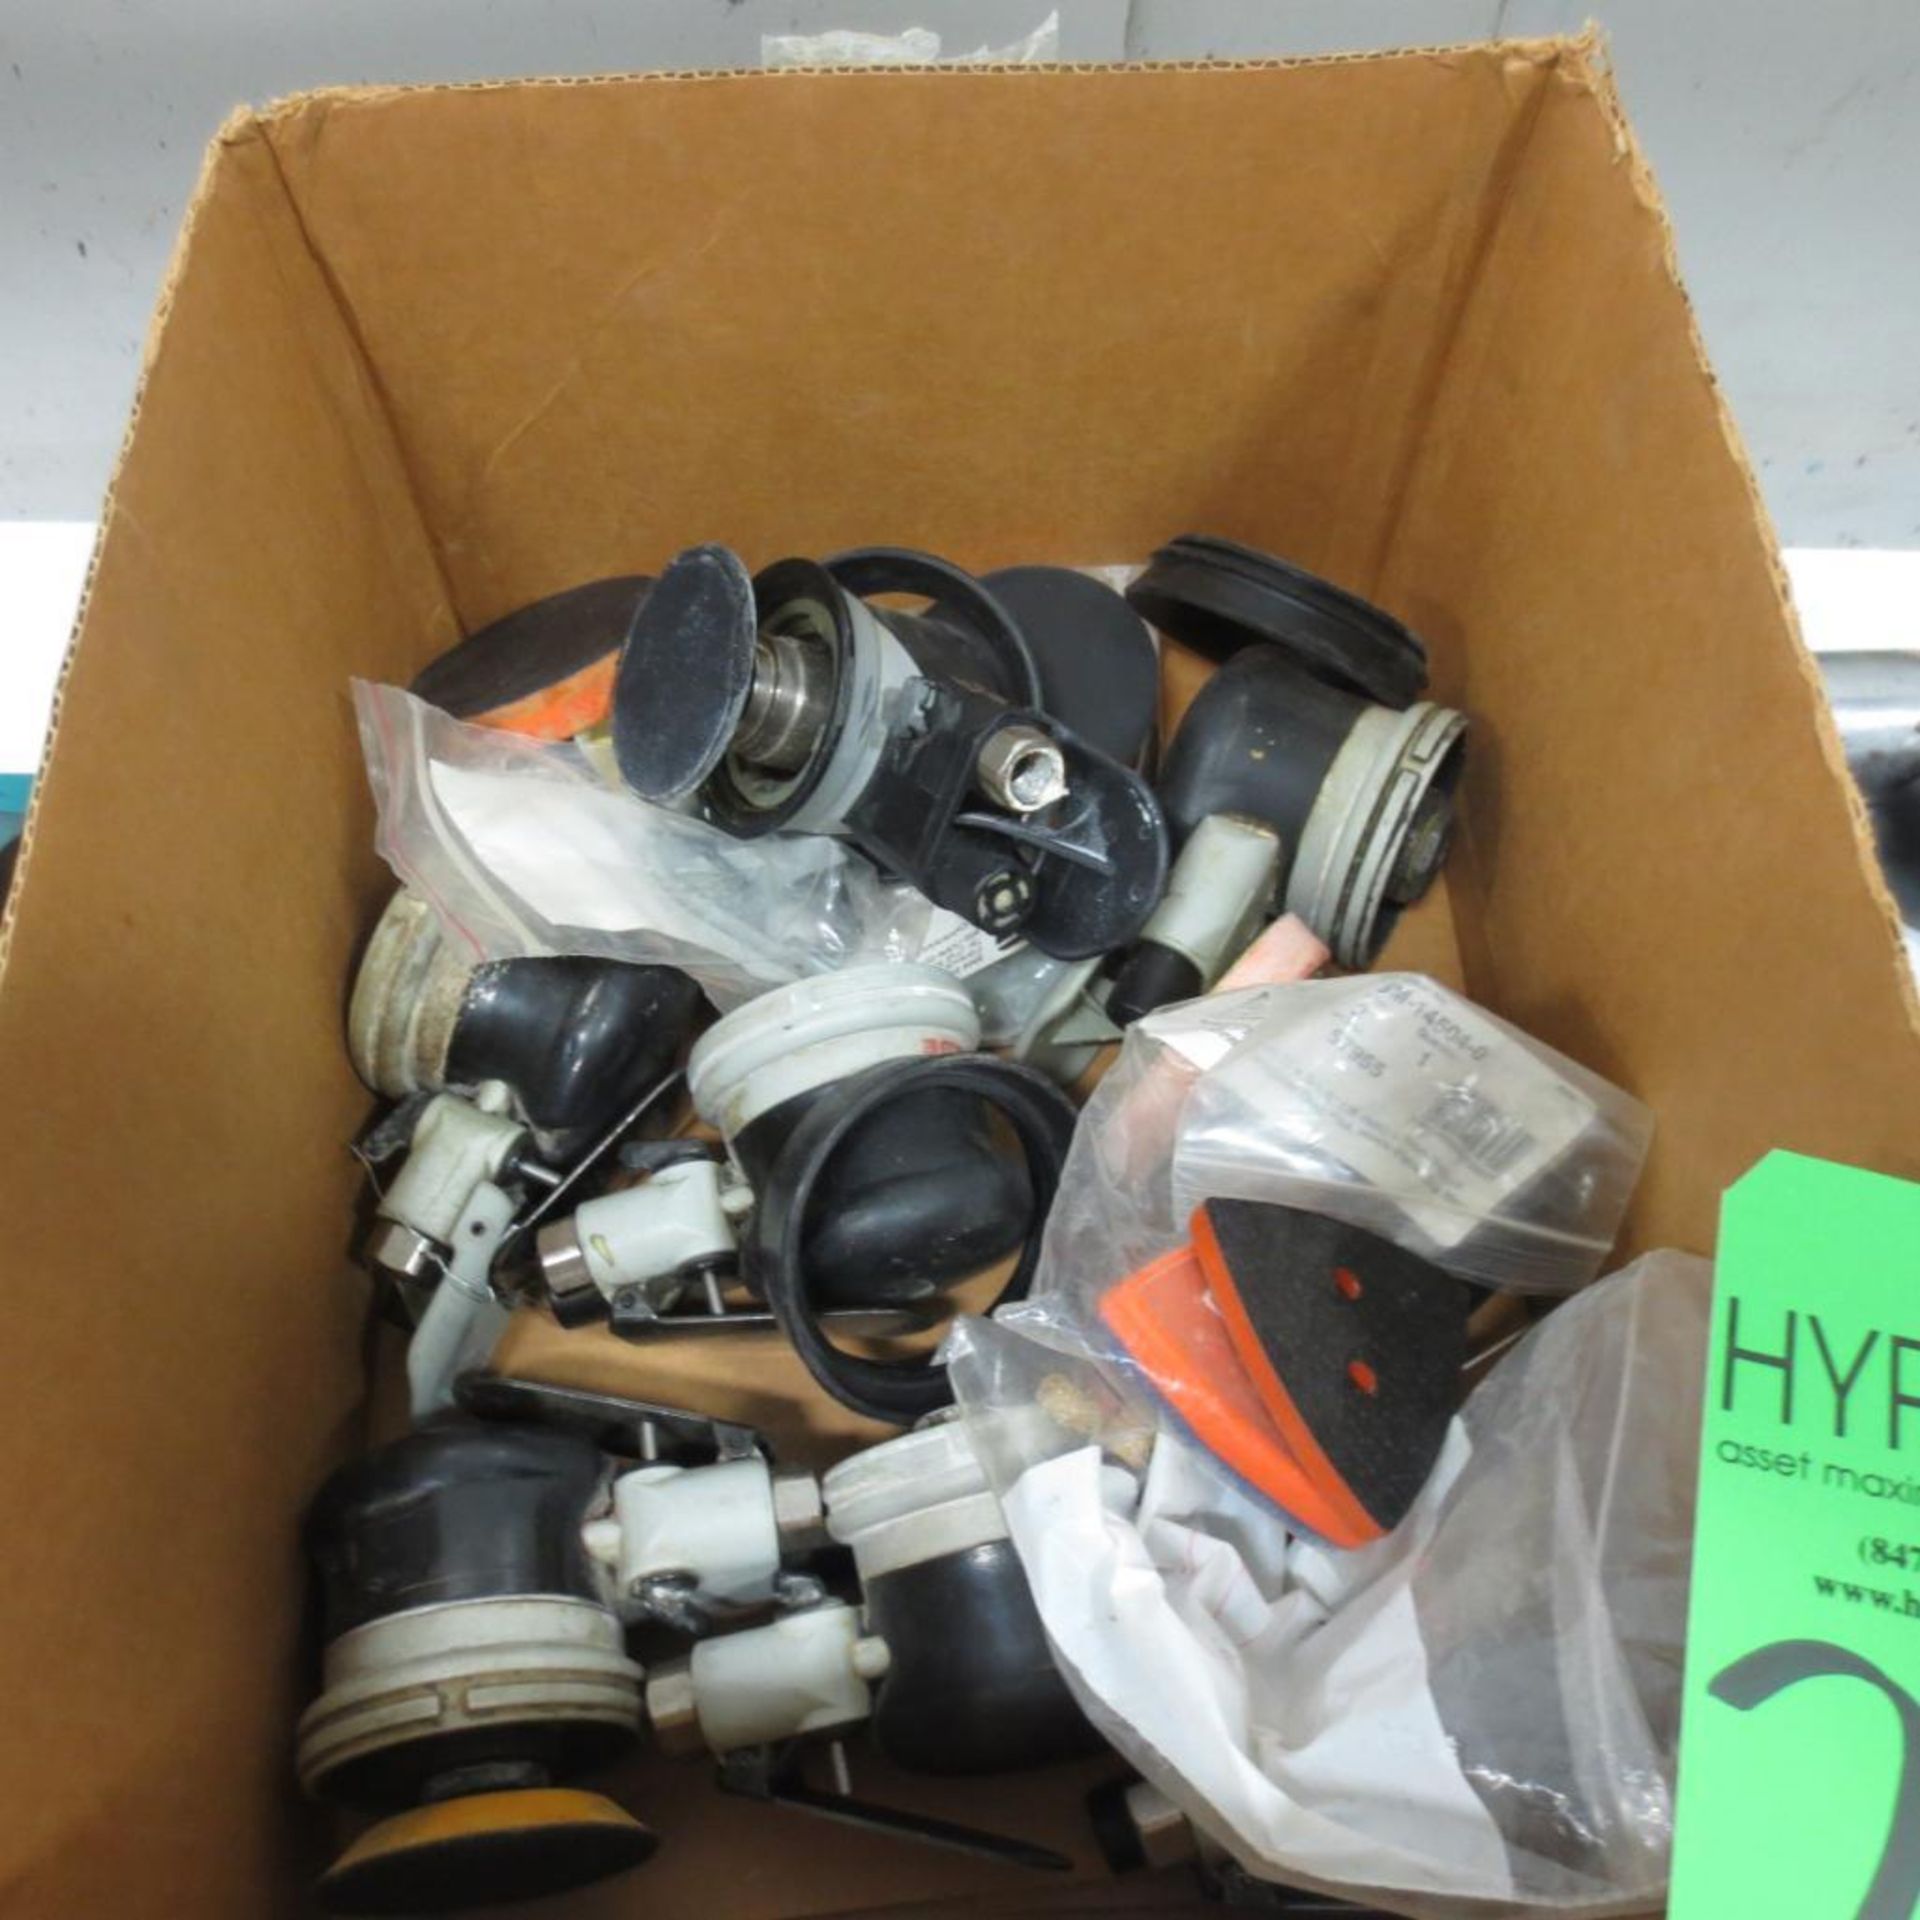 Pneumatic Sanders and Parts.**Lot Located at 2395 Dakota Drive, Grafton, WI 53024** - Image 2 of 2